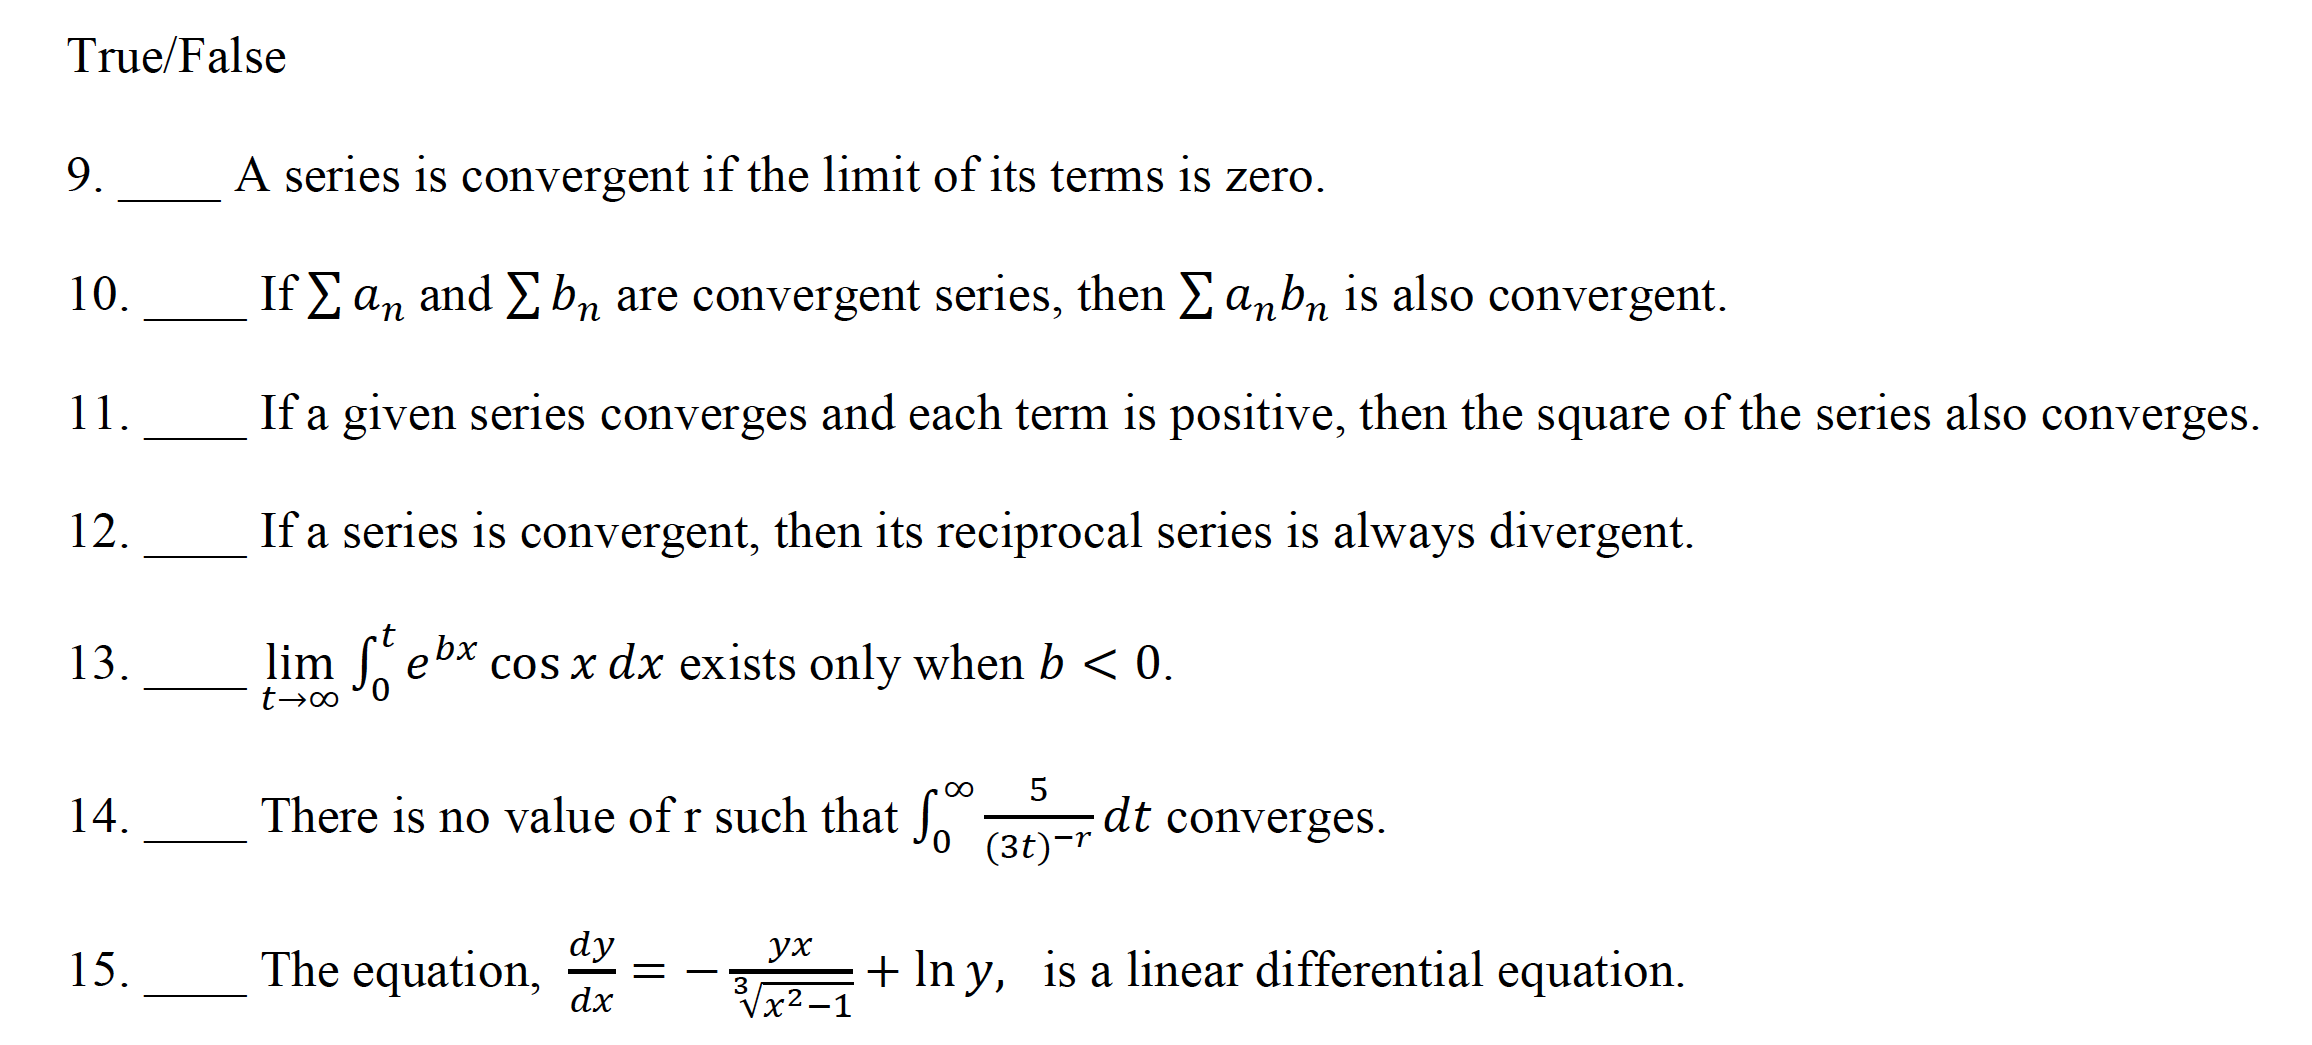 10.
If E an and E bn are convergent series, then E anbn is also convergent.
